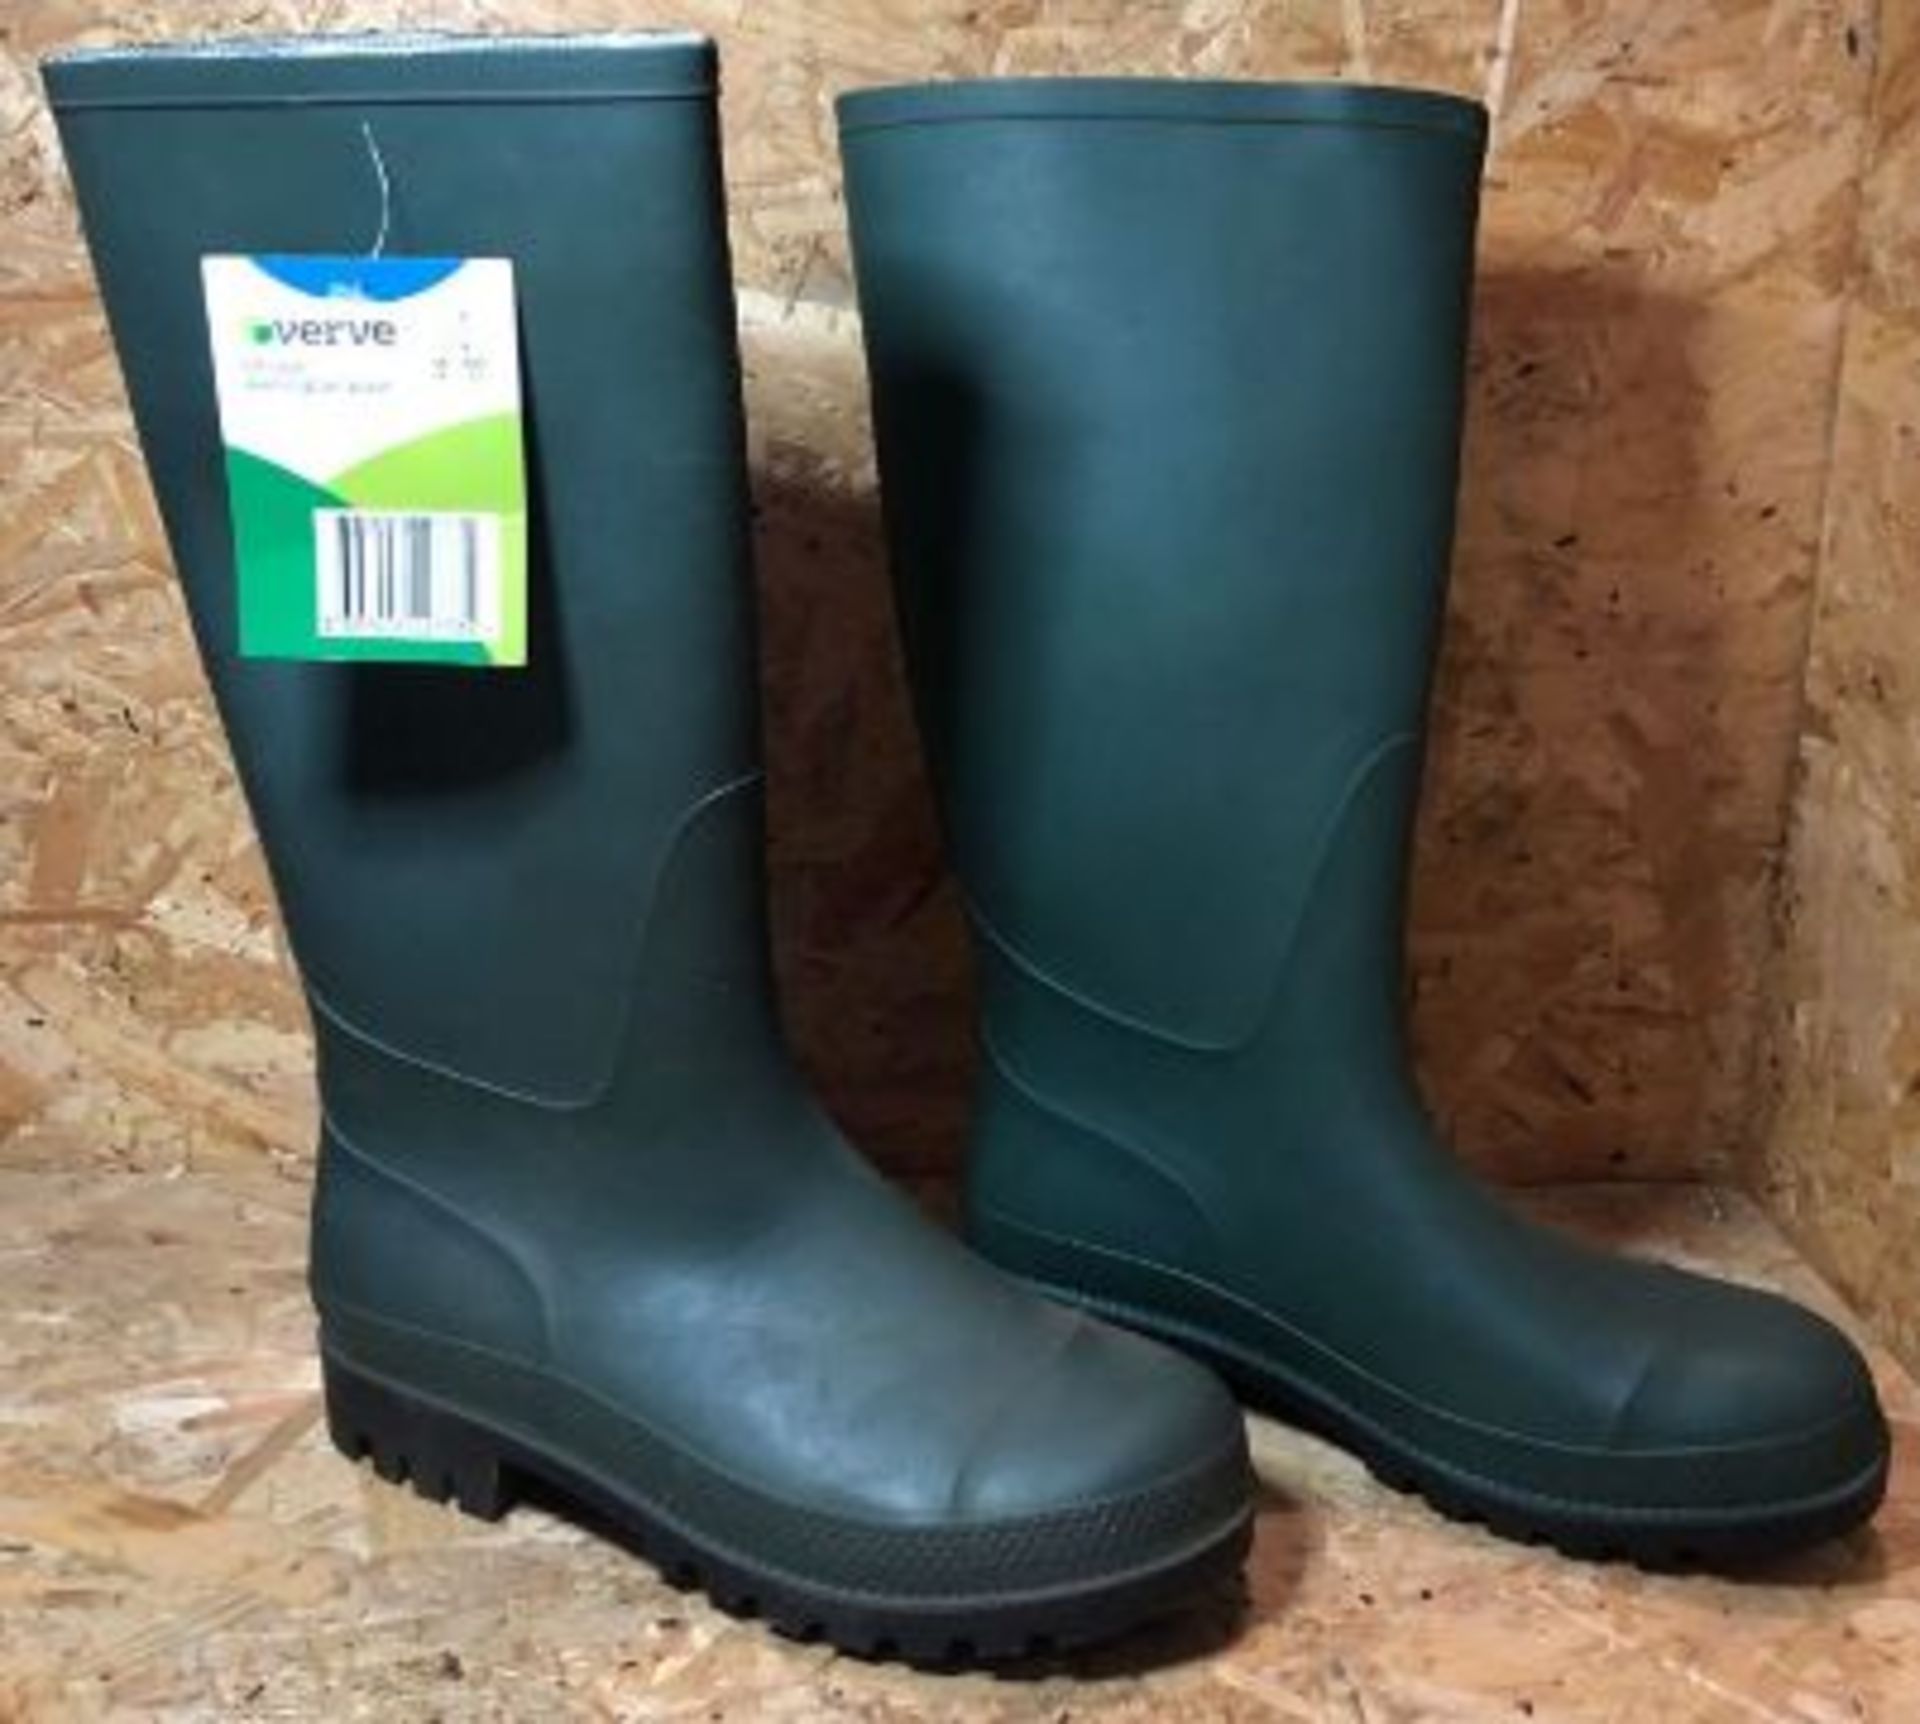 4 X PAIRS OF VERVE UNISEX WELLINGTON BOOTS - GREEN / SIZE: 4 UK / APPEARS TO BE UNUSED, LOOK LIKE NE